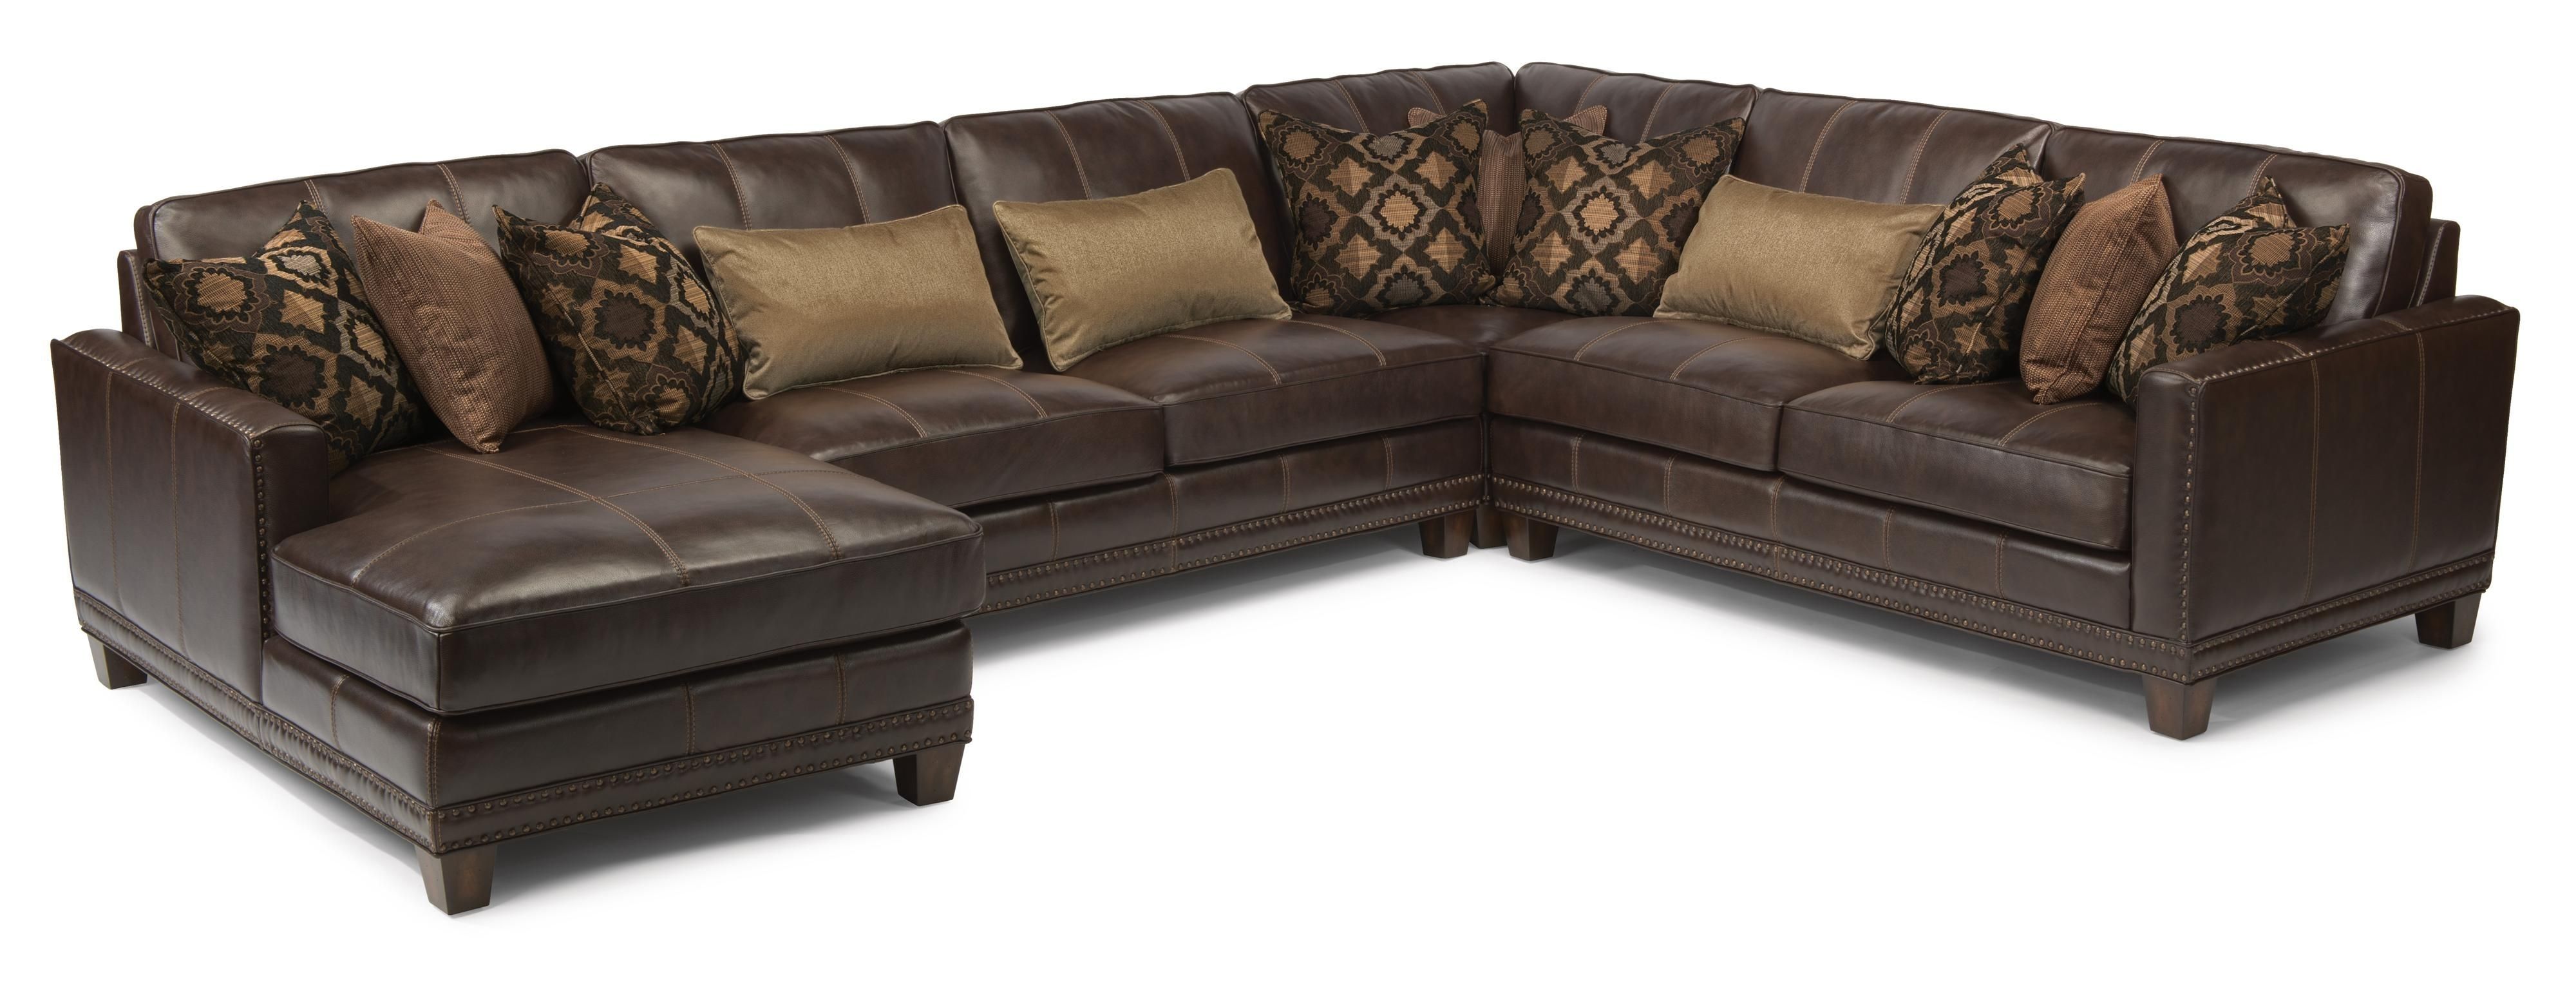 Latitudes – Port Royal Transitional Four Piece Sectional Sofa With Within Johnson City Tn Sectional Sofas (View 2 of 10)